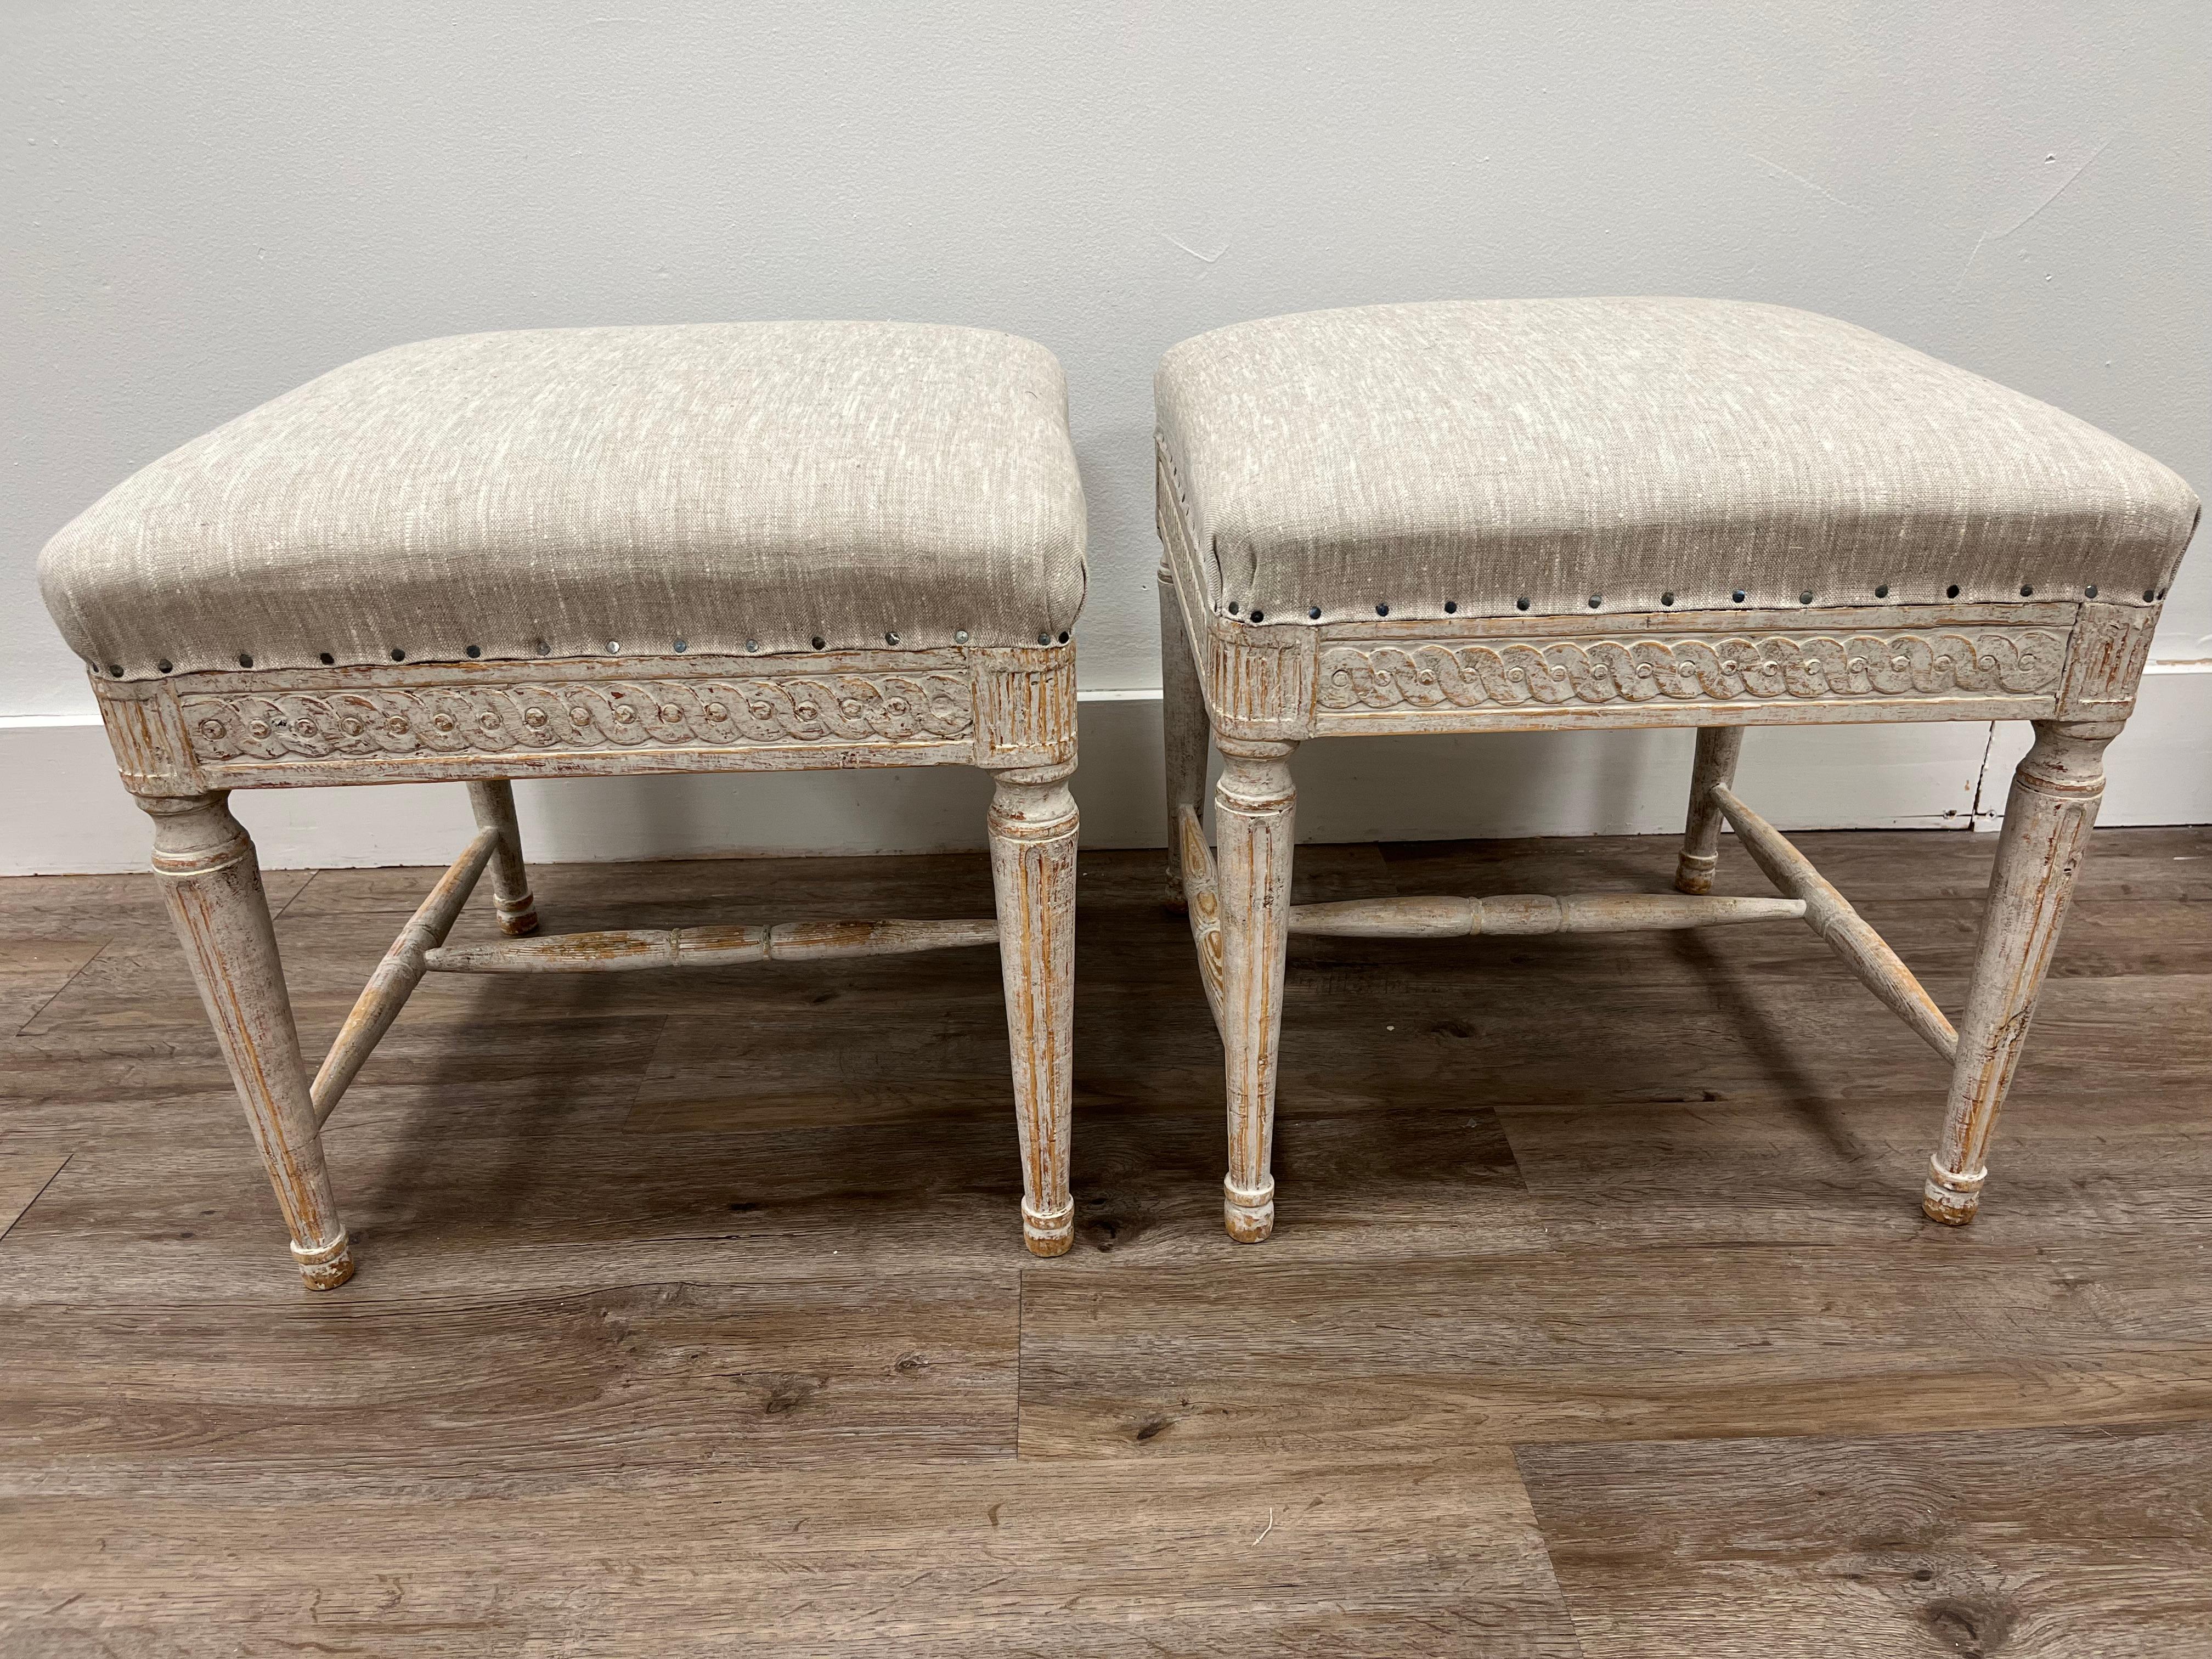 A beautiful pair of Swedish Late Gustavian footstools. Featuring a decorative hand-carved Guilloché scroll with reeded fleurons on the corners. Turned legs are tapered and fluted. Supported by turned H-cross construction. Tastefully repainted in